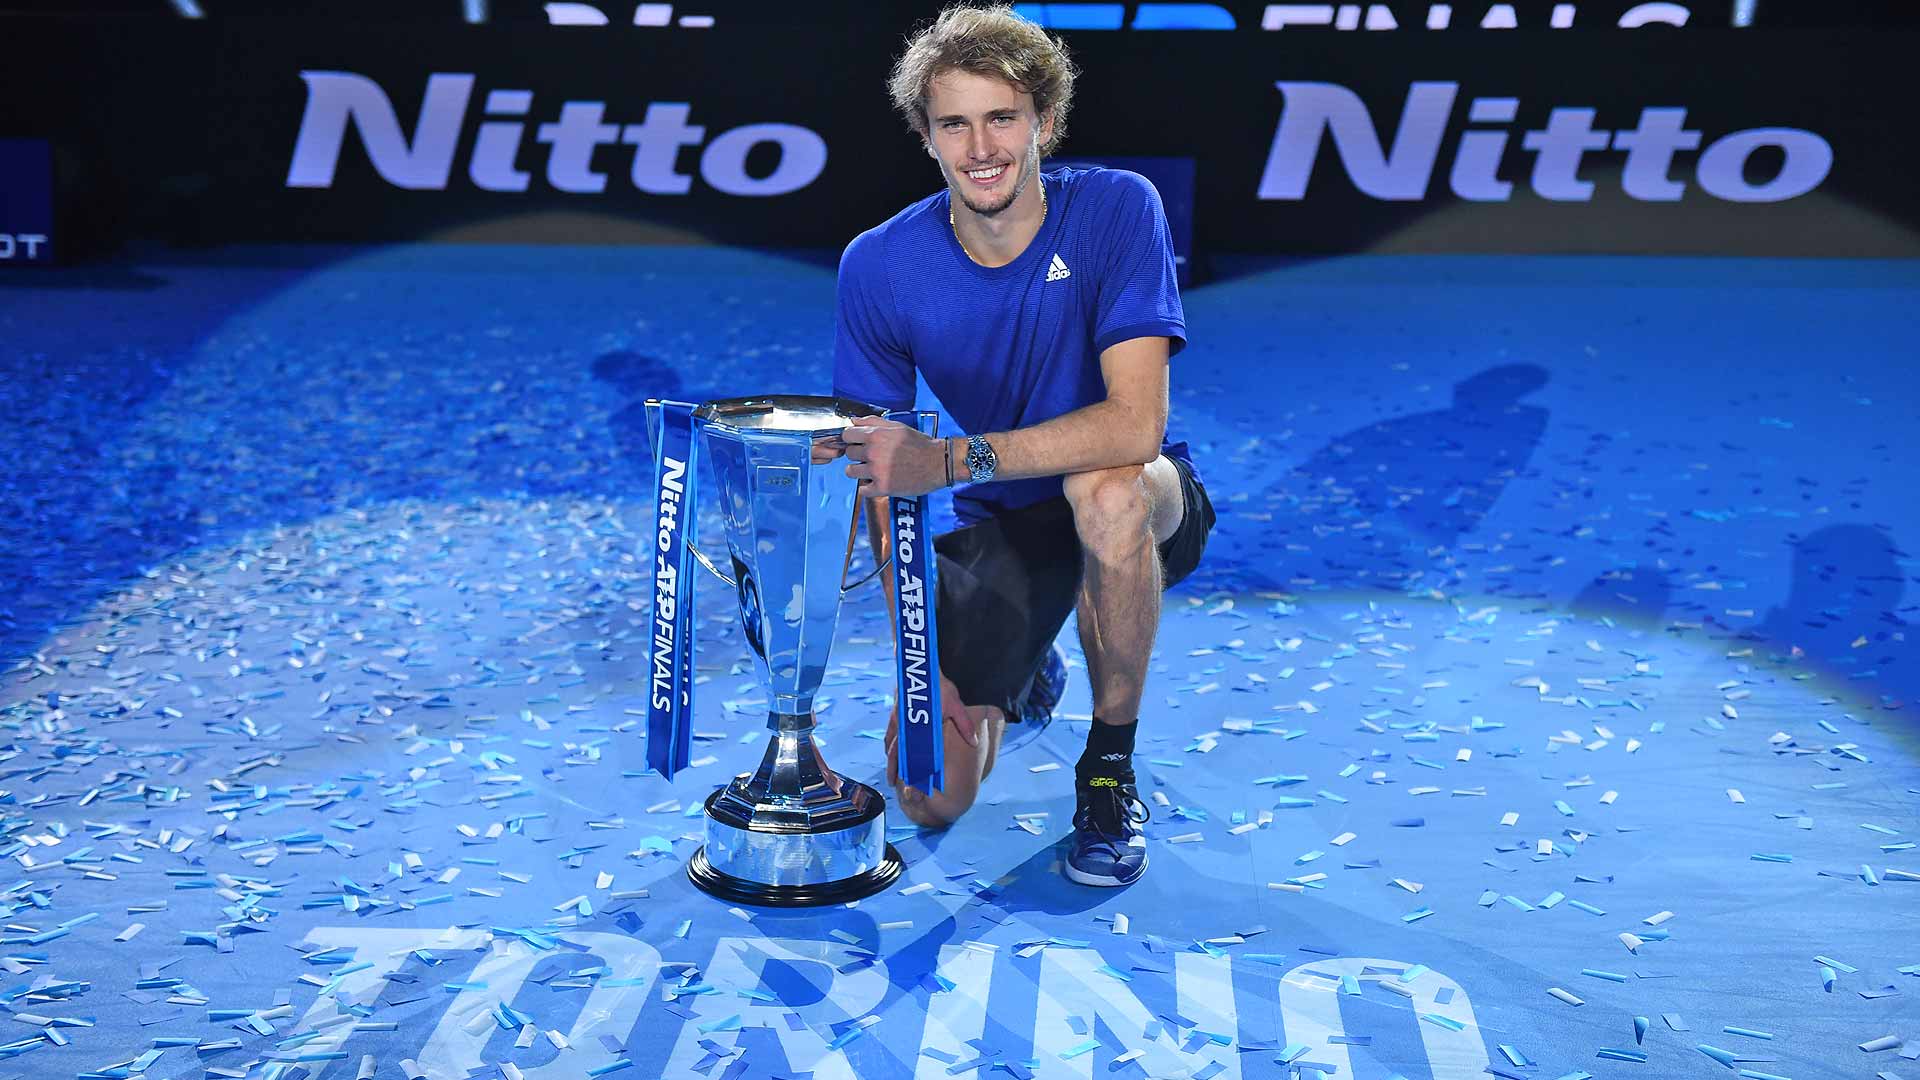 Race to ATP Finals heats up after the US Open